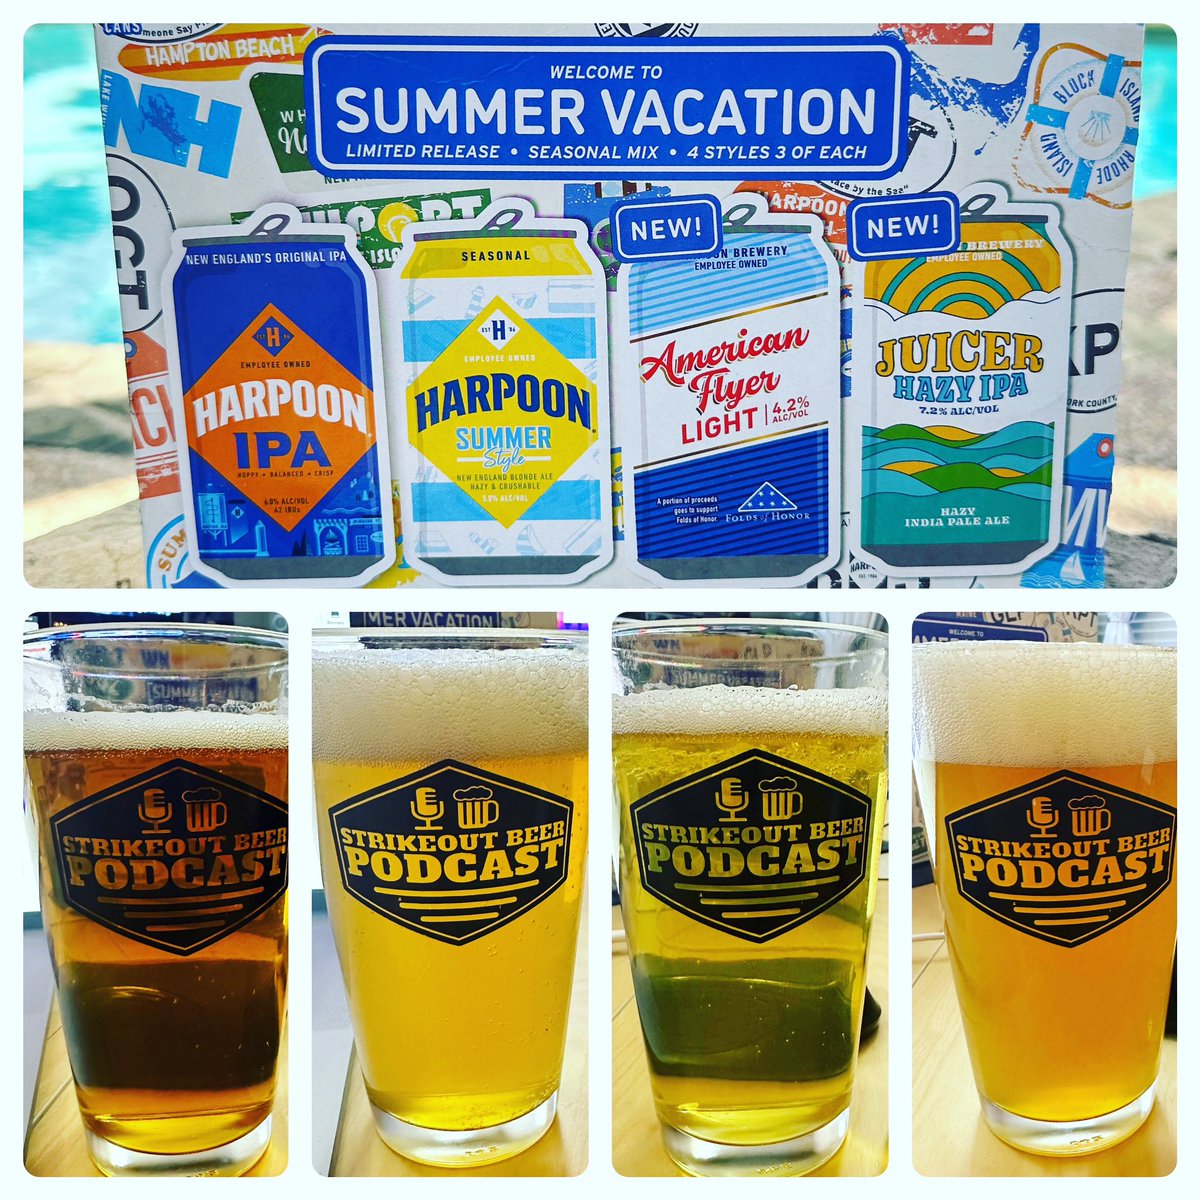 Got to knock back this variety pack by @harpoonbrewery last live show and it was a tasty! Cheers!

#beer #craftbeer #beerreviewer #beerstagram #beerpic #beerpics #beerpicture #beerpictures #beerpicoftheday #craftbeerlife #craftbeerlove #harpoonbrewery #strikeoutbeer